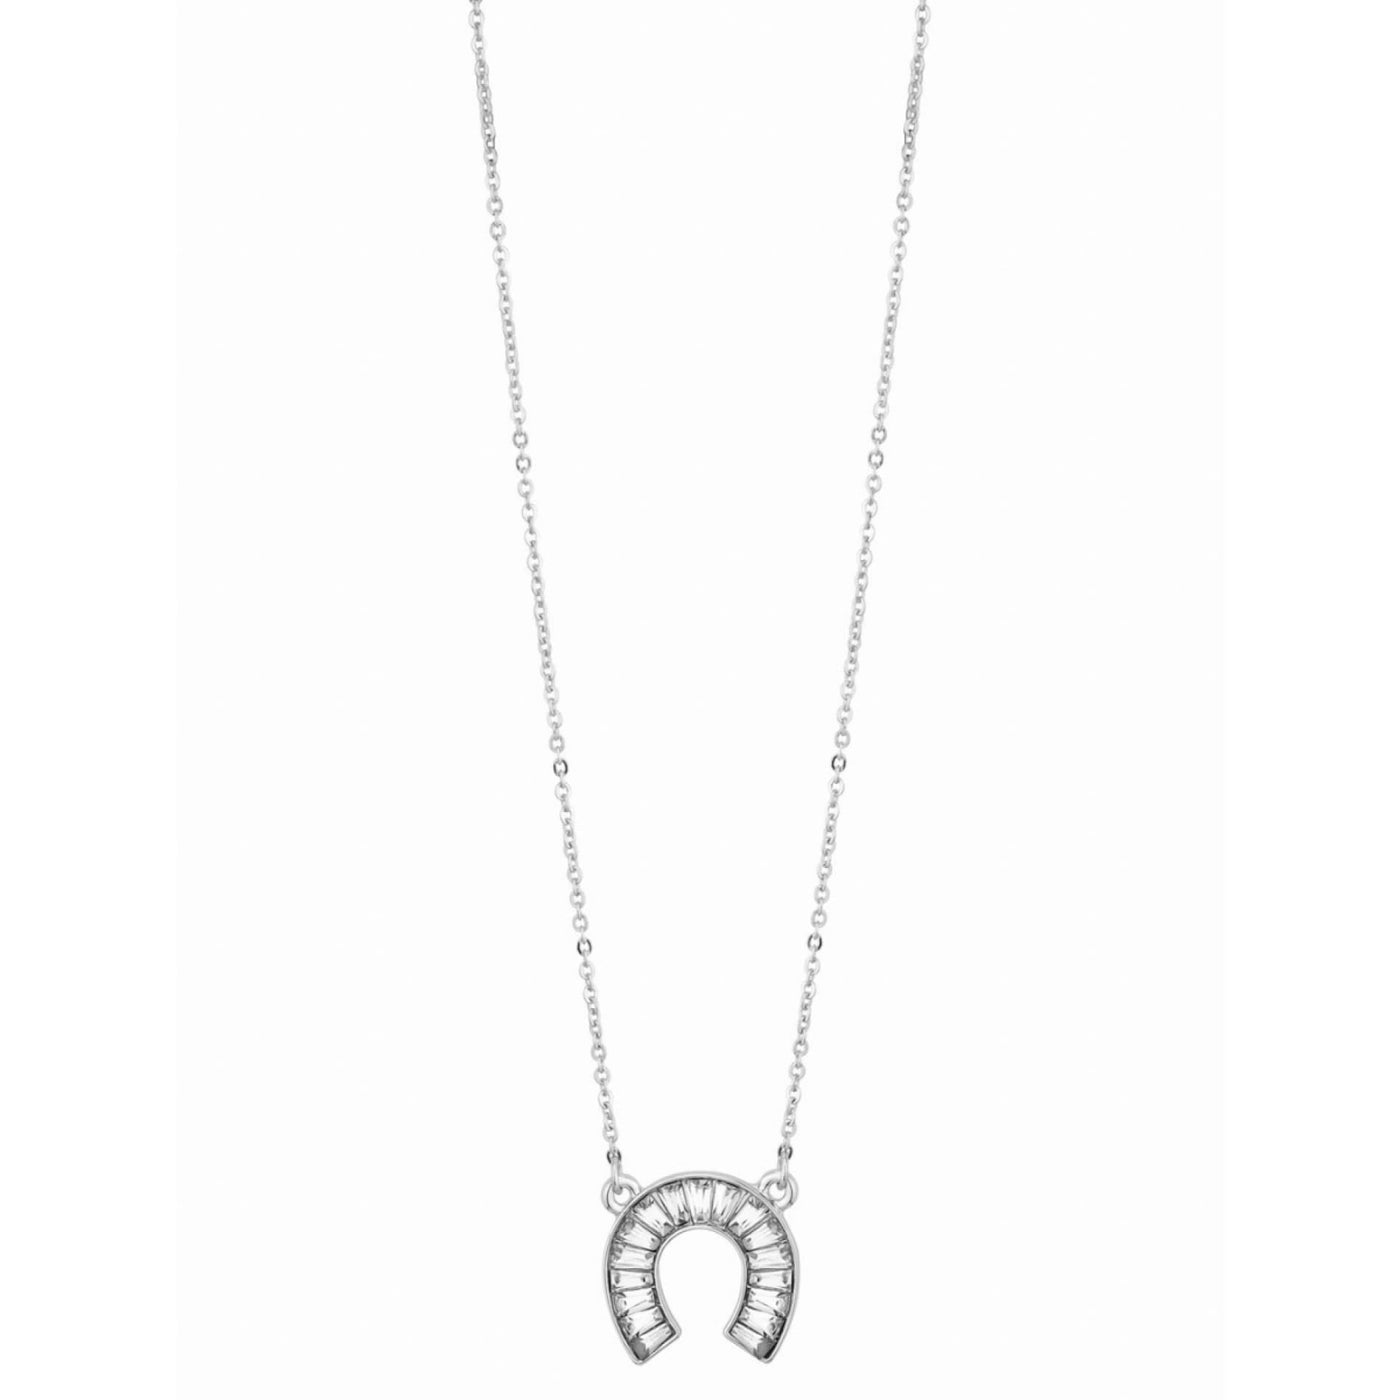 Nolan Necklace - Silver - 190 Jewelry